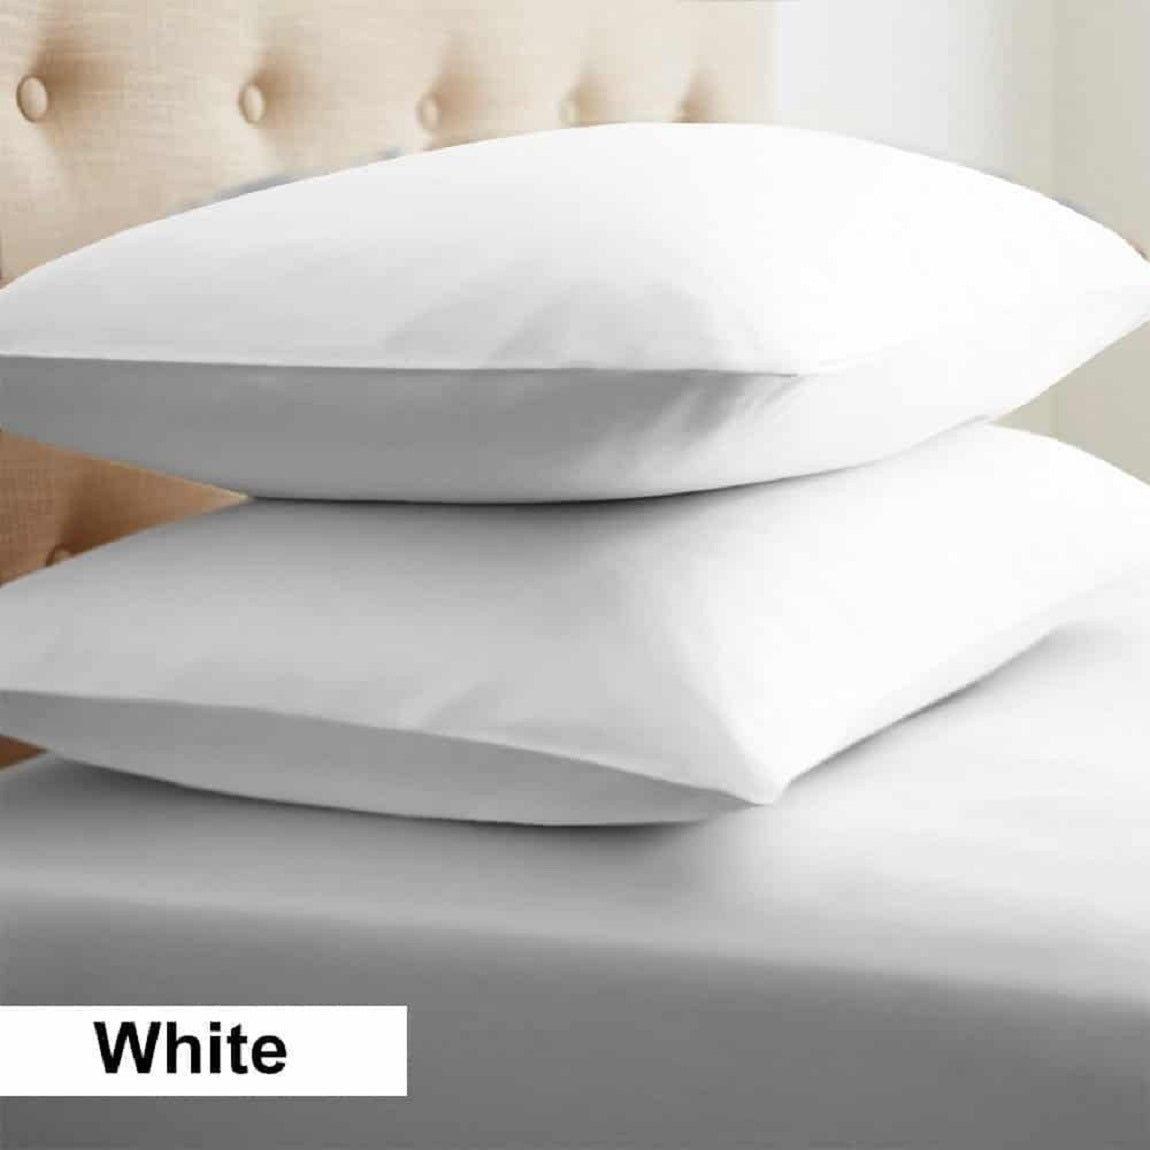 JDX Microfiber Bed Pillows - 100% Breathable Soft Cotton Premium Sleeping Pillow, Great for Side and Back Support Pillow - Pack of 2 - JDX STORE